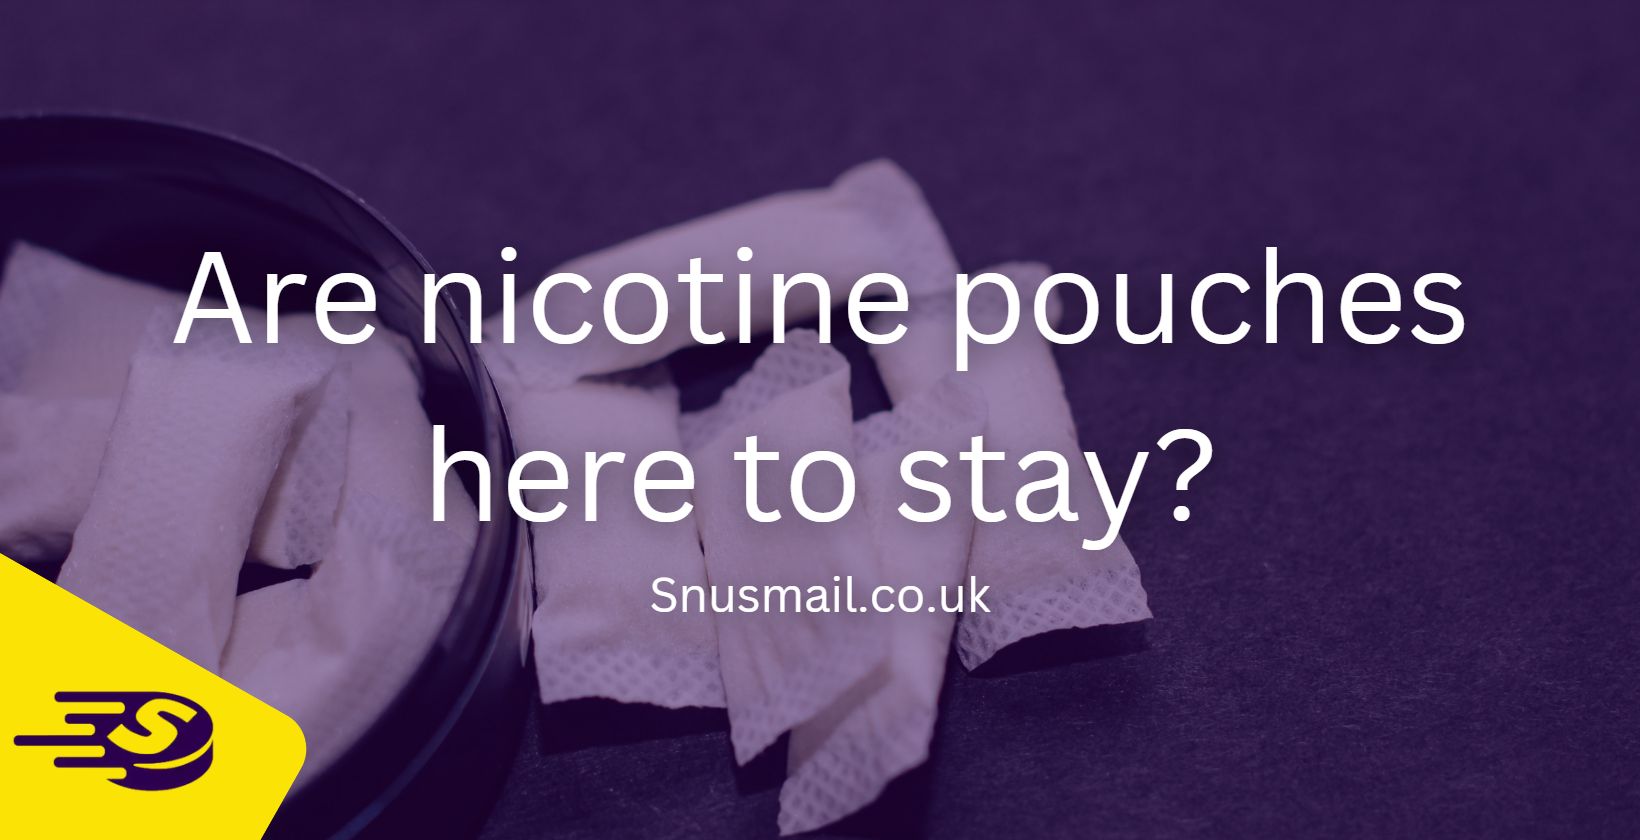 Are nicotine pouches here to stay Snusmail.co.uk